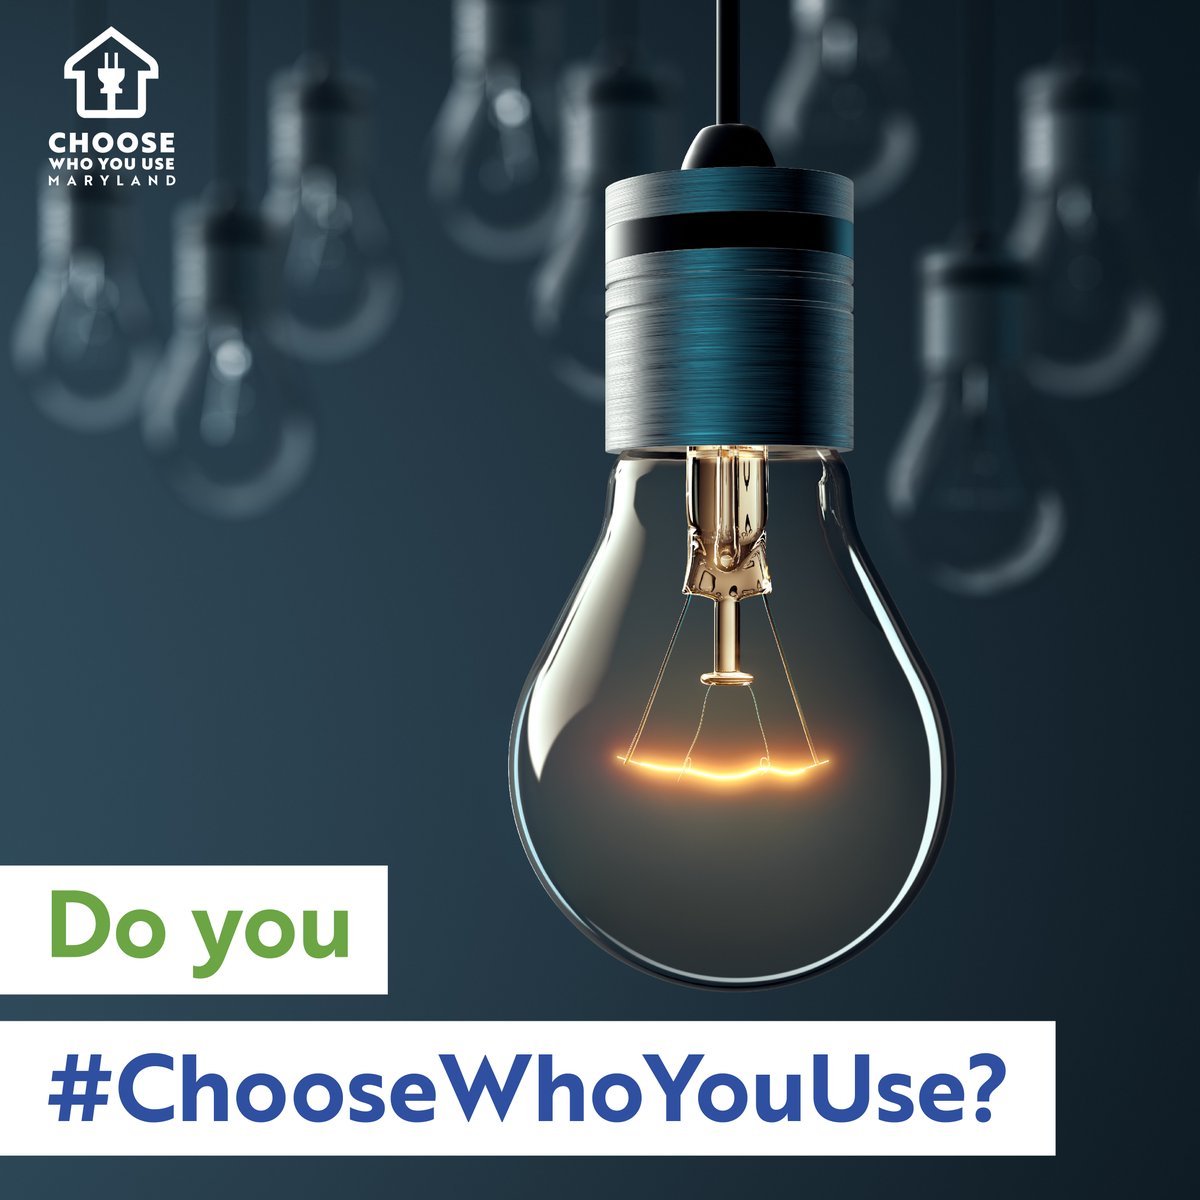 Are you among the millions of Maryland residents who don't #ChooseWhoYouUse yet? It's time to join the movement so more families can access transparent and reliable options on the market. #EnergyChoice #ElectricChoice #EnergySupplier